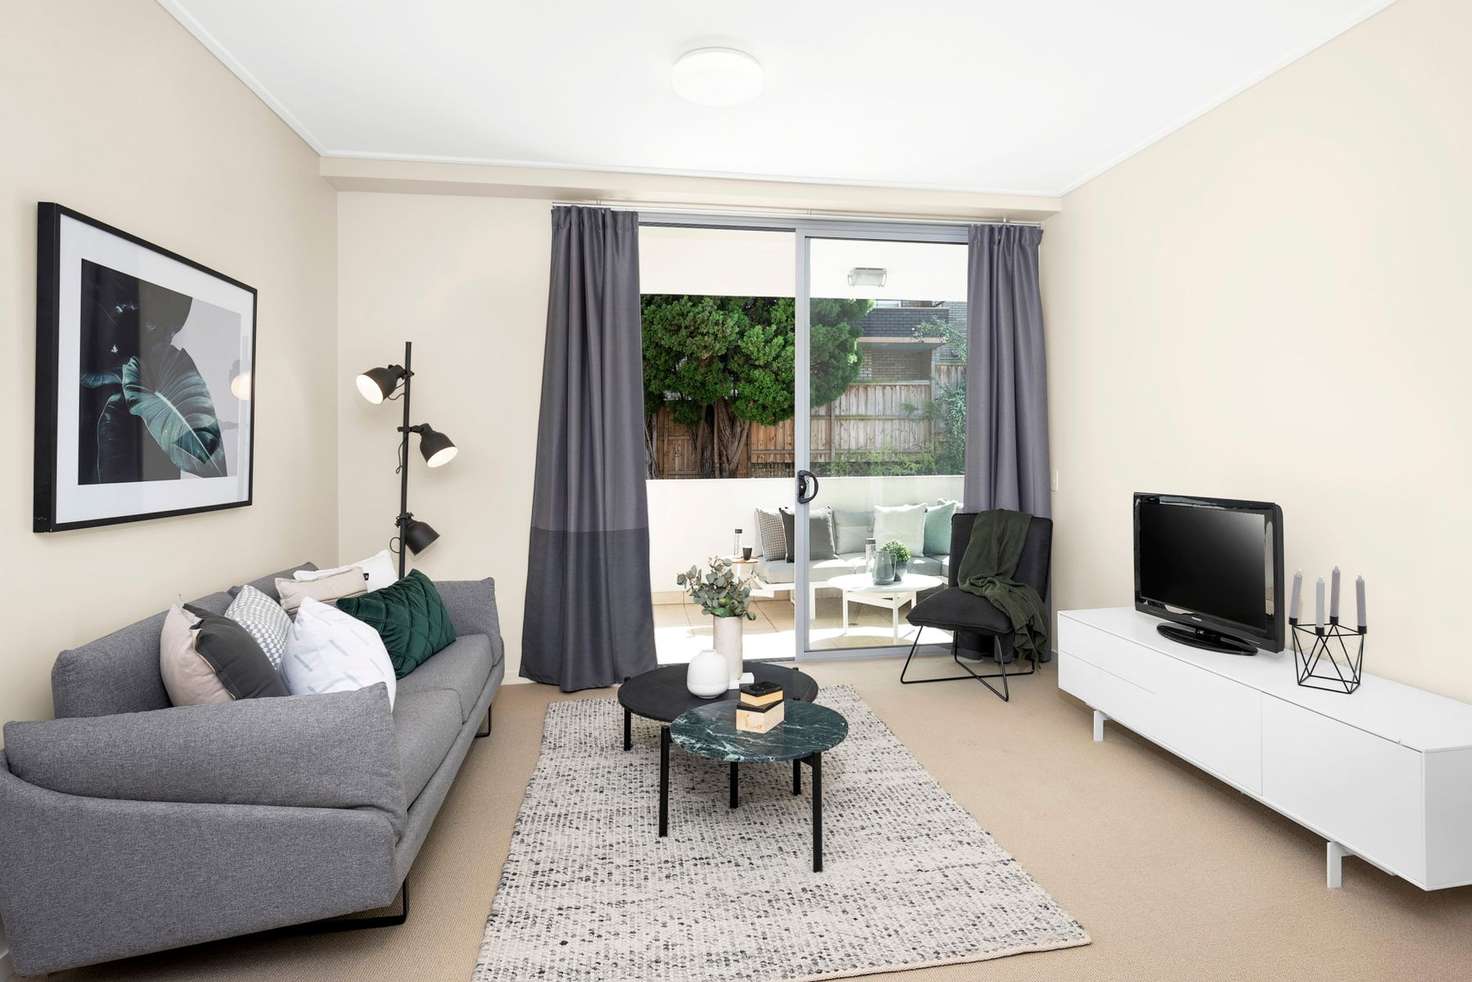 Main view of Homely apartment listing, 2302/1 Nield Avenue, Greenwich NSW 2065